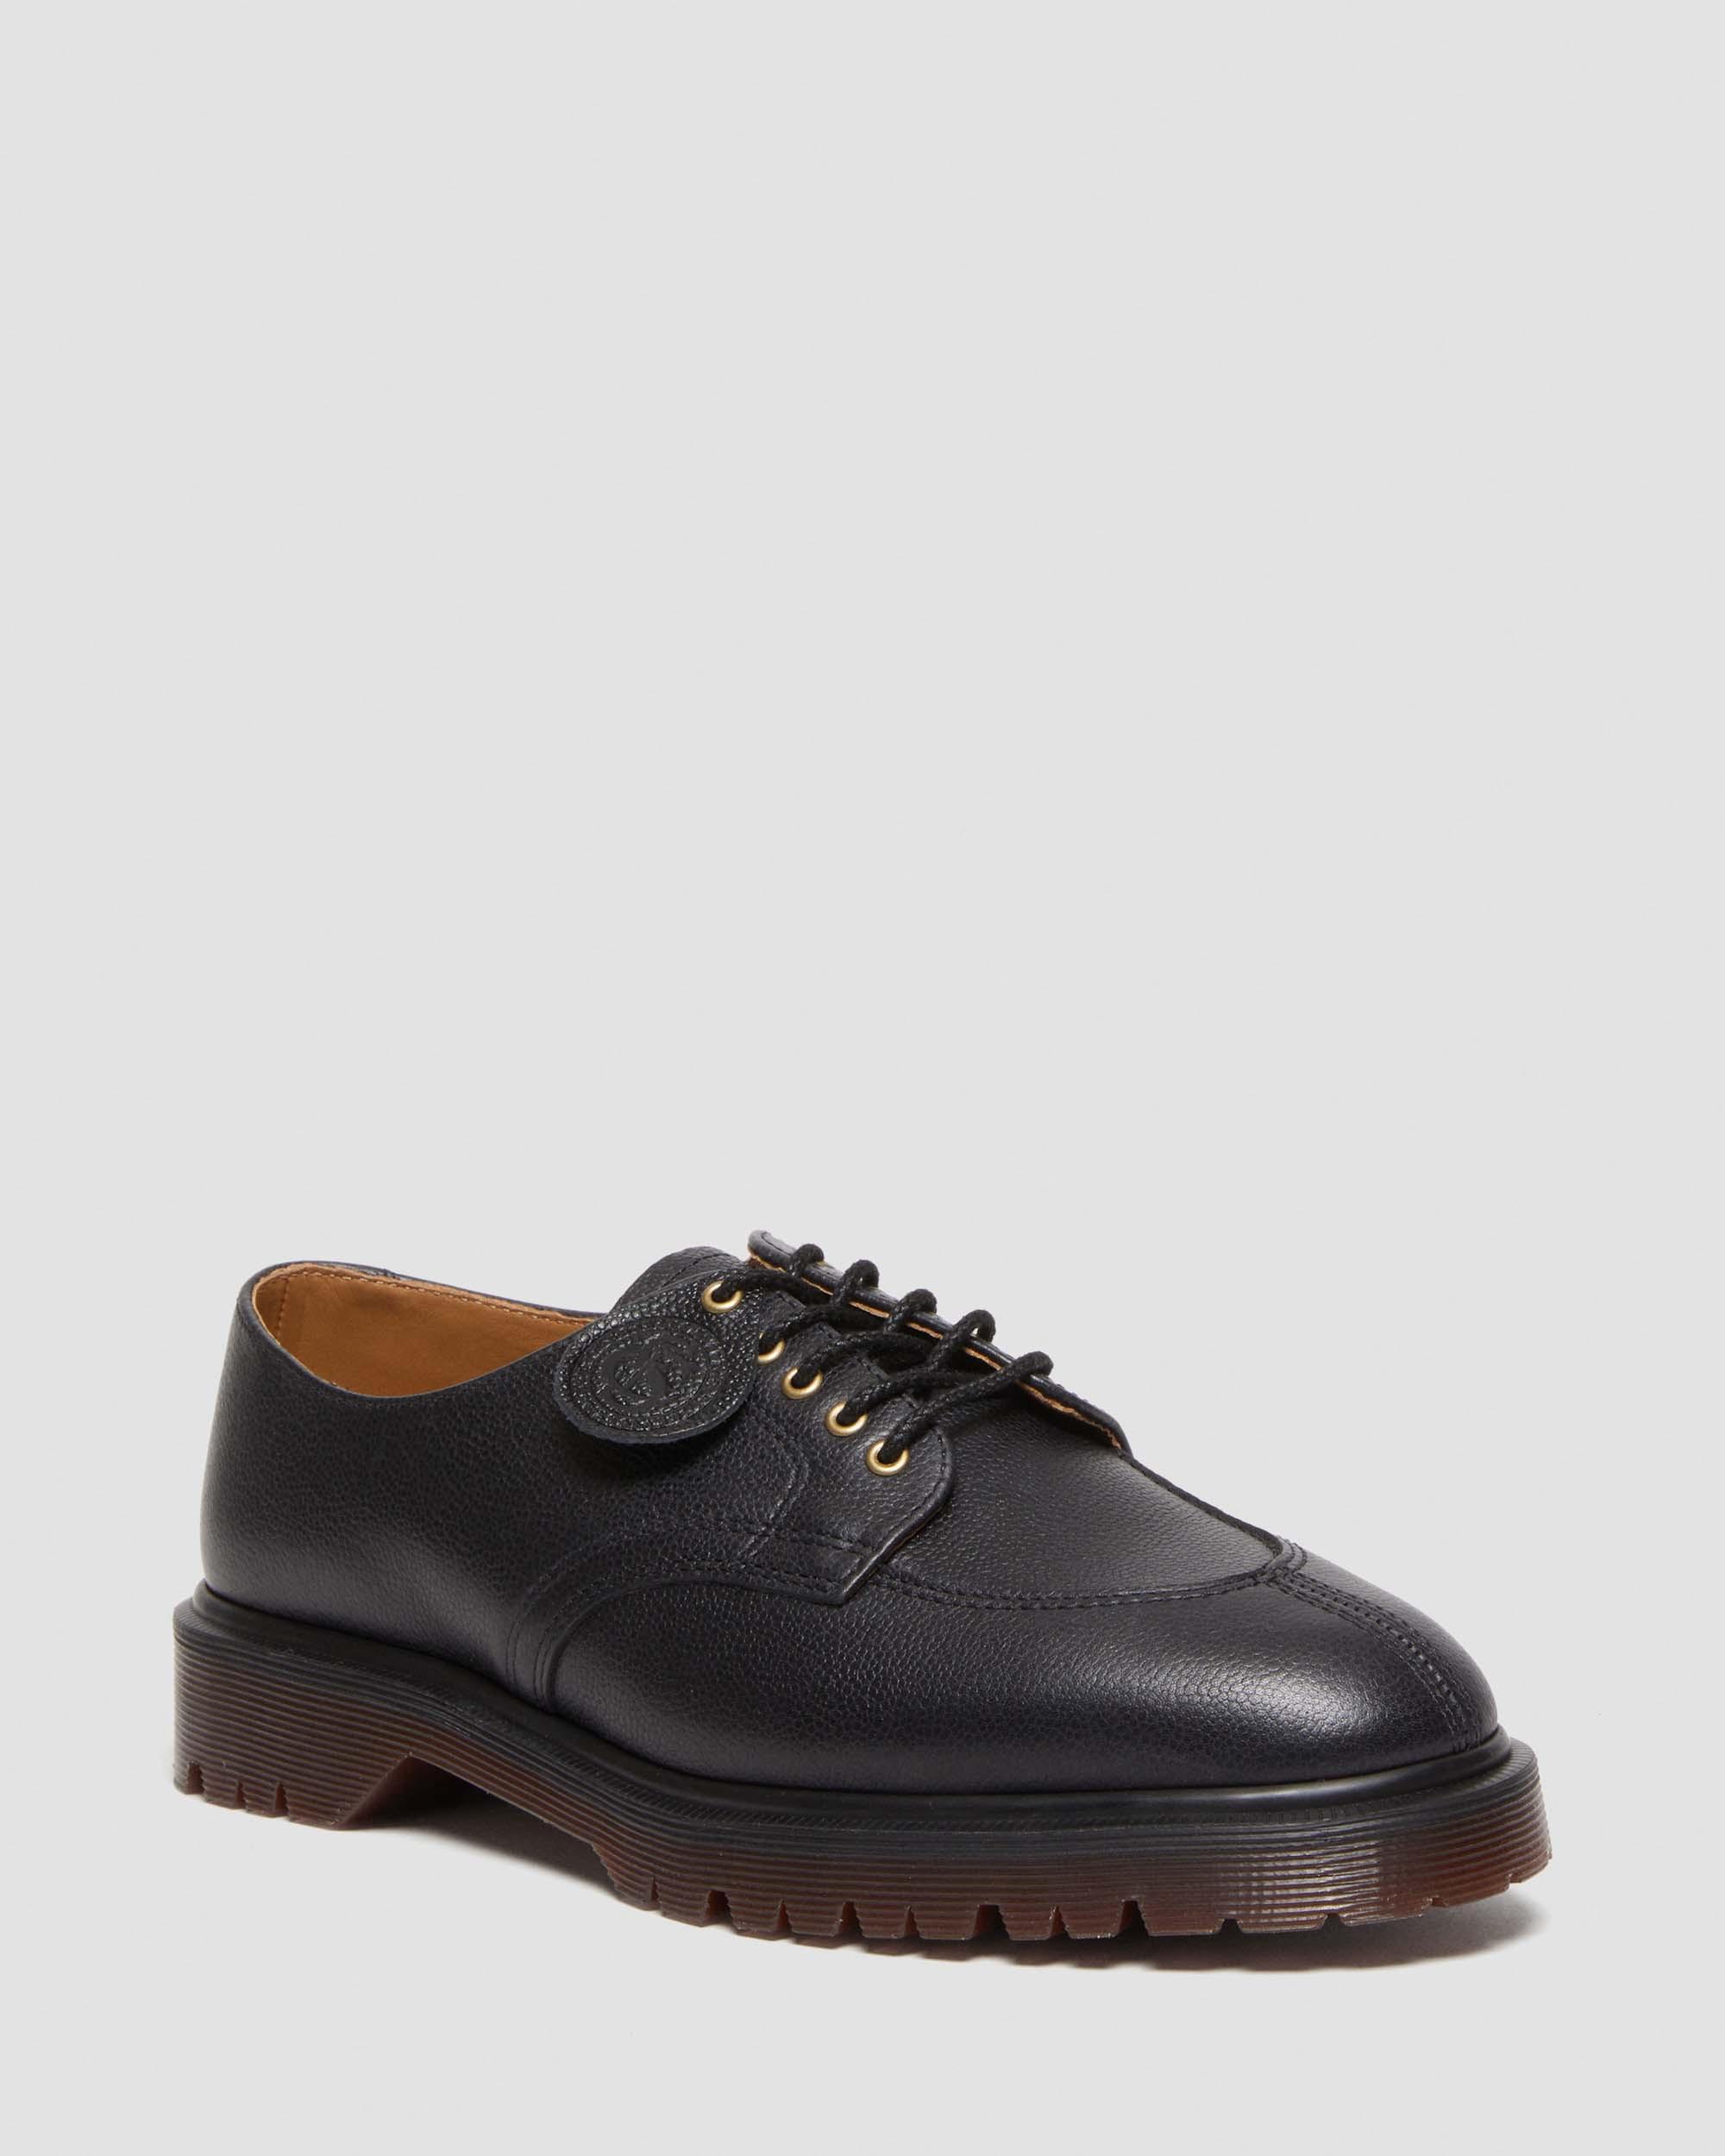 2046 Westminster Leather Lace Up Shoes, Black | Dr. Martens